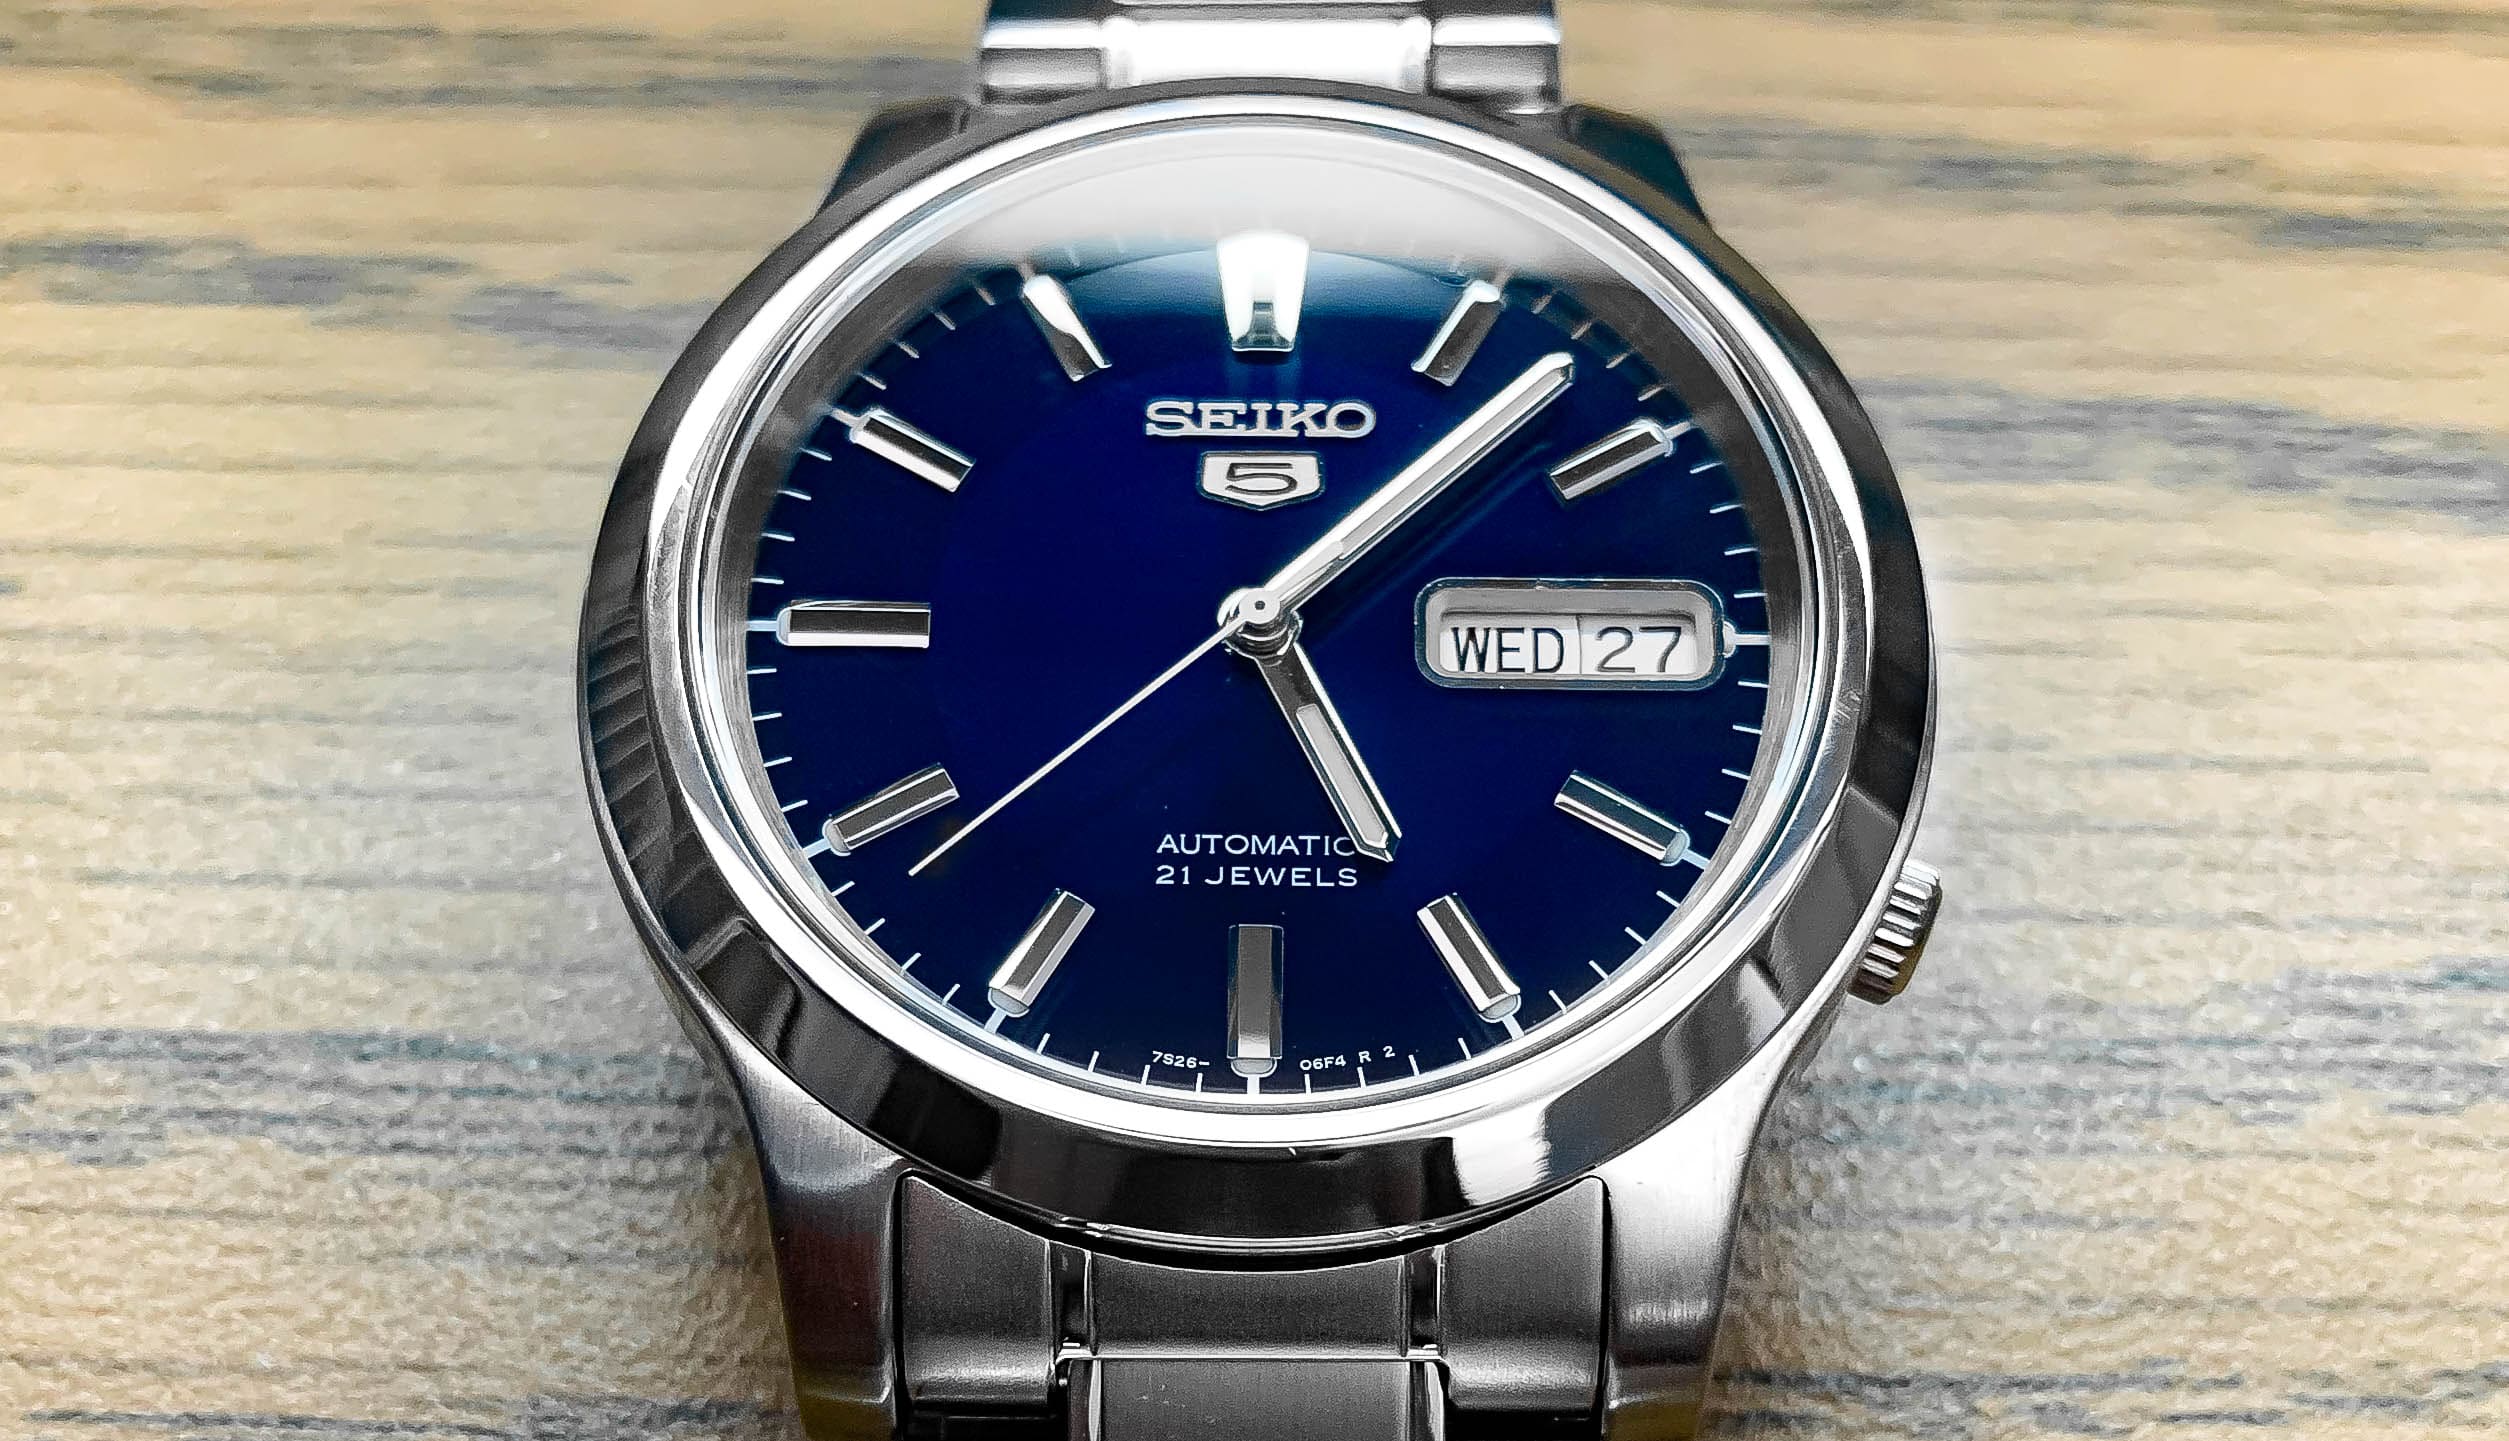 Articulation Jo da dok Seiko 5 SNK793 Review: Keeping It Casual and Classy in Blue